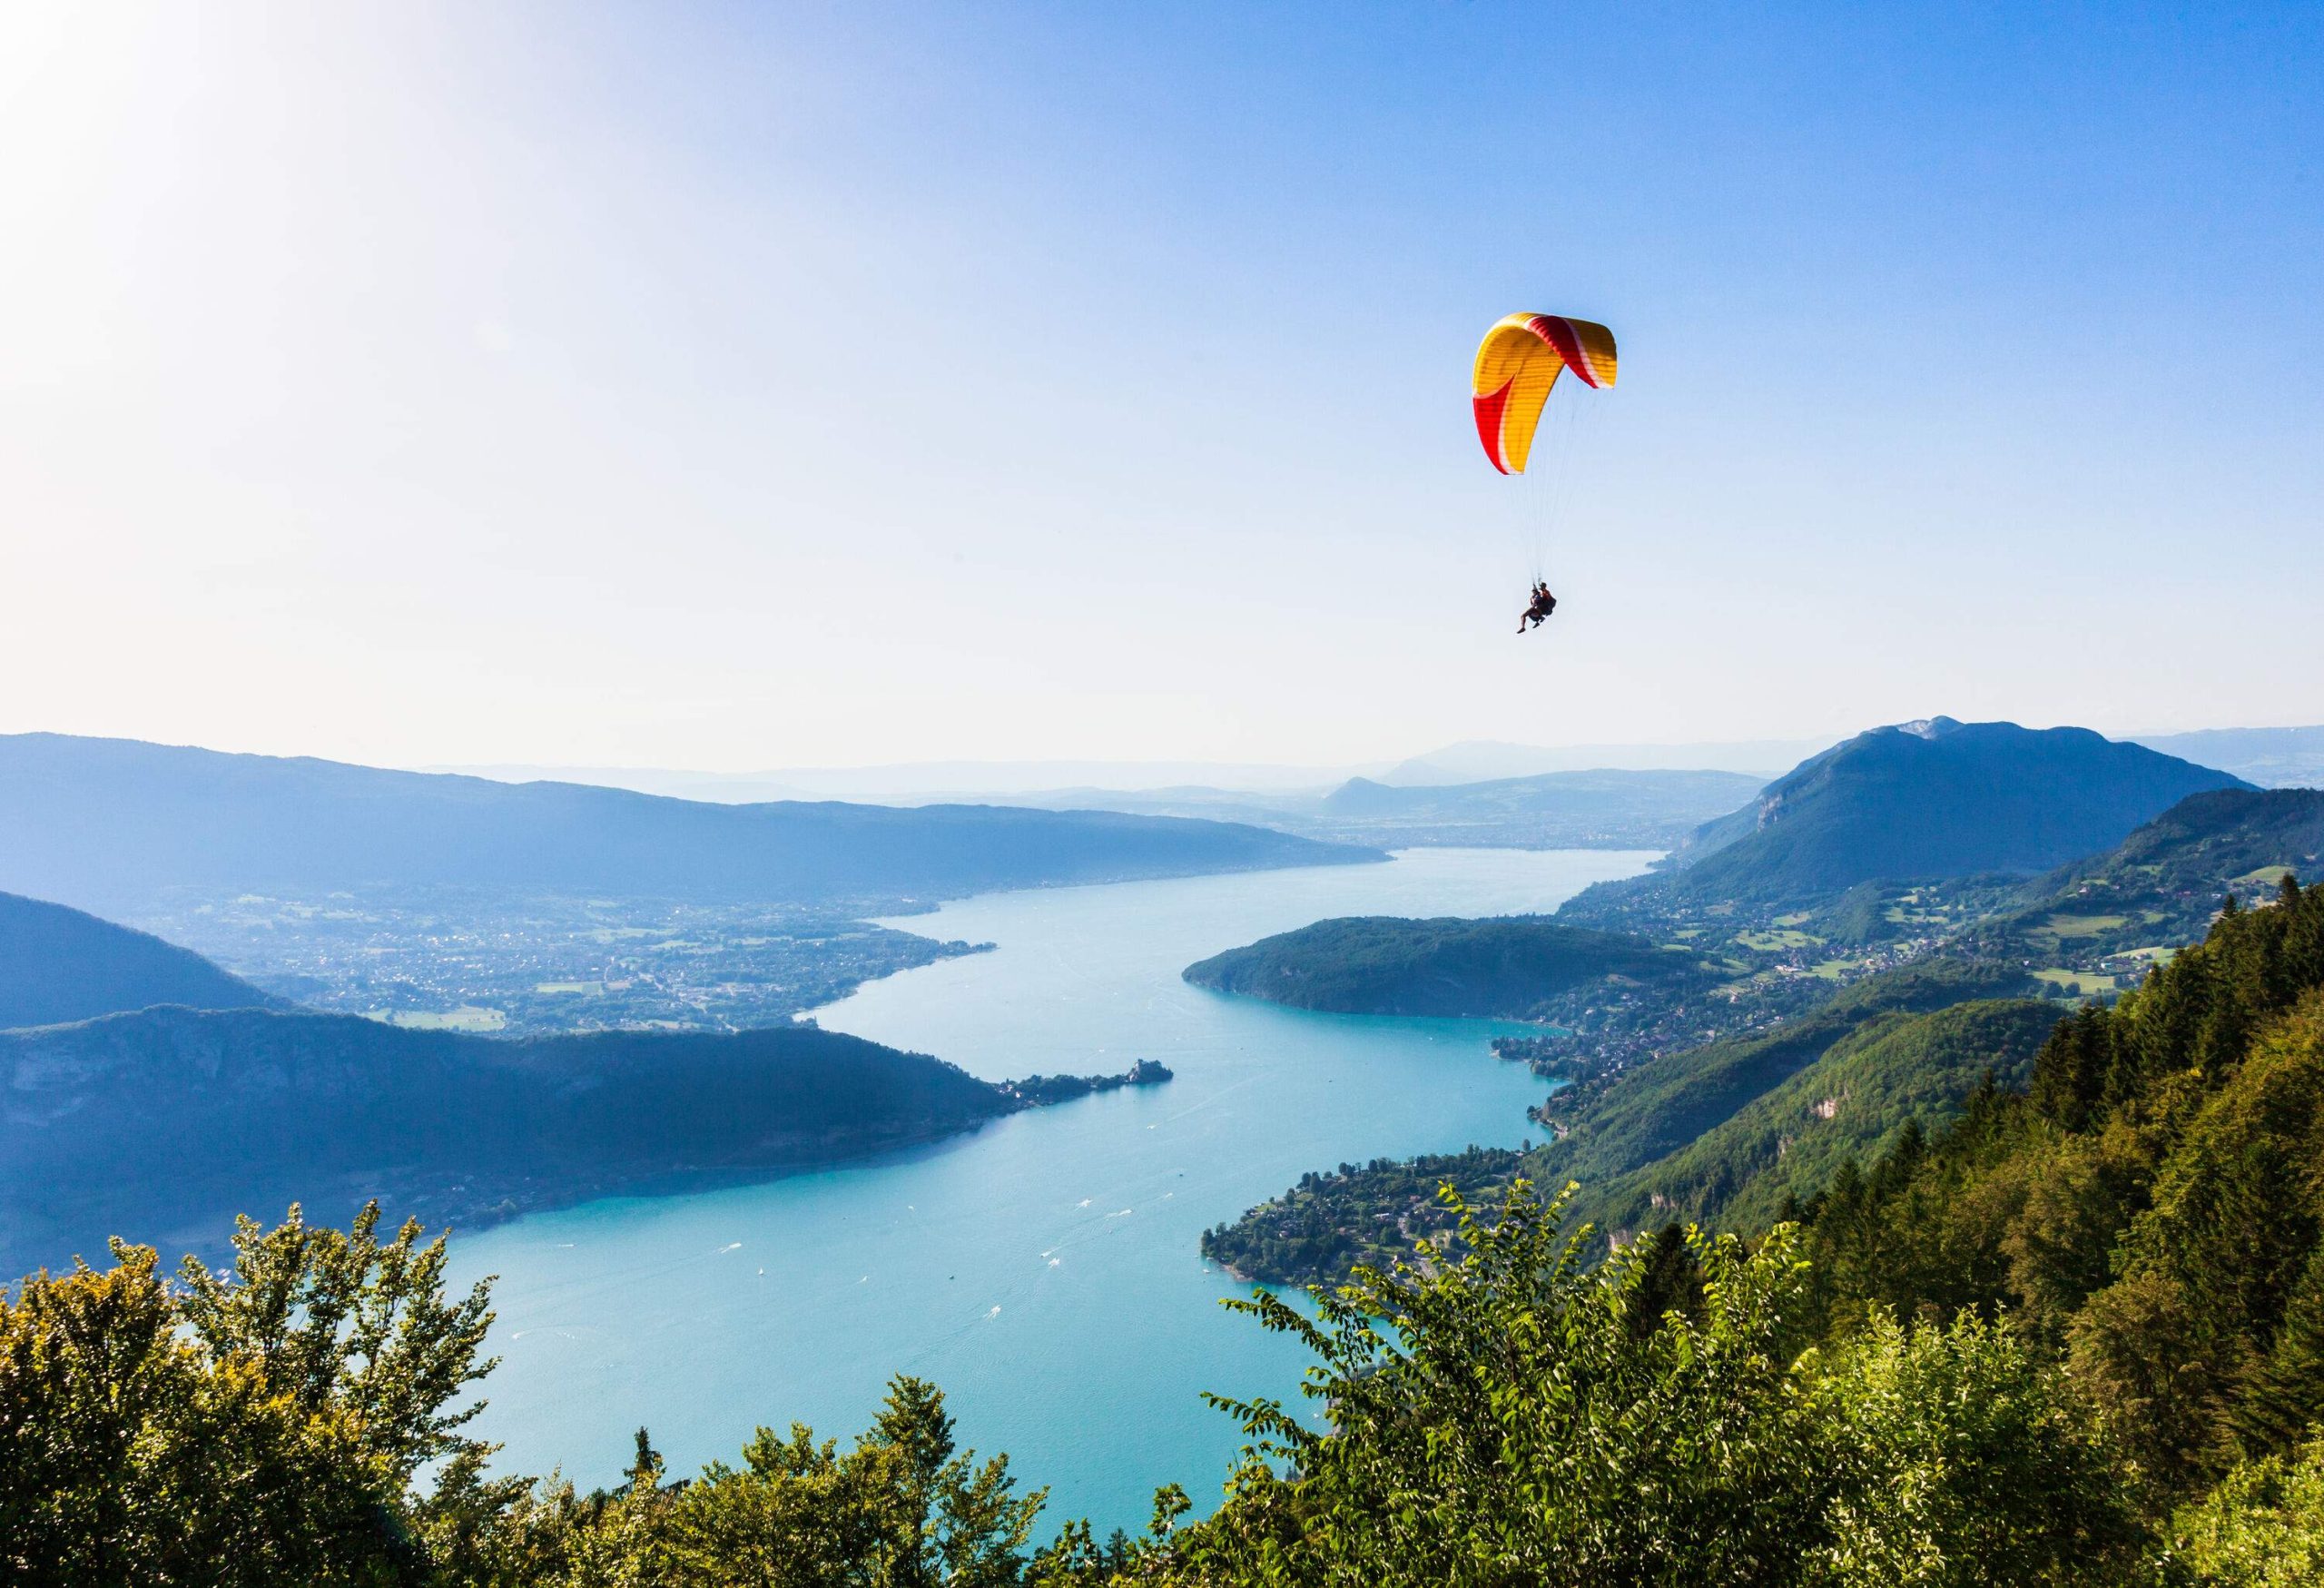 Two individuals are paragliding over a tranquil lake surrounded by forested islands.